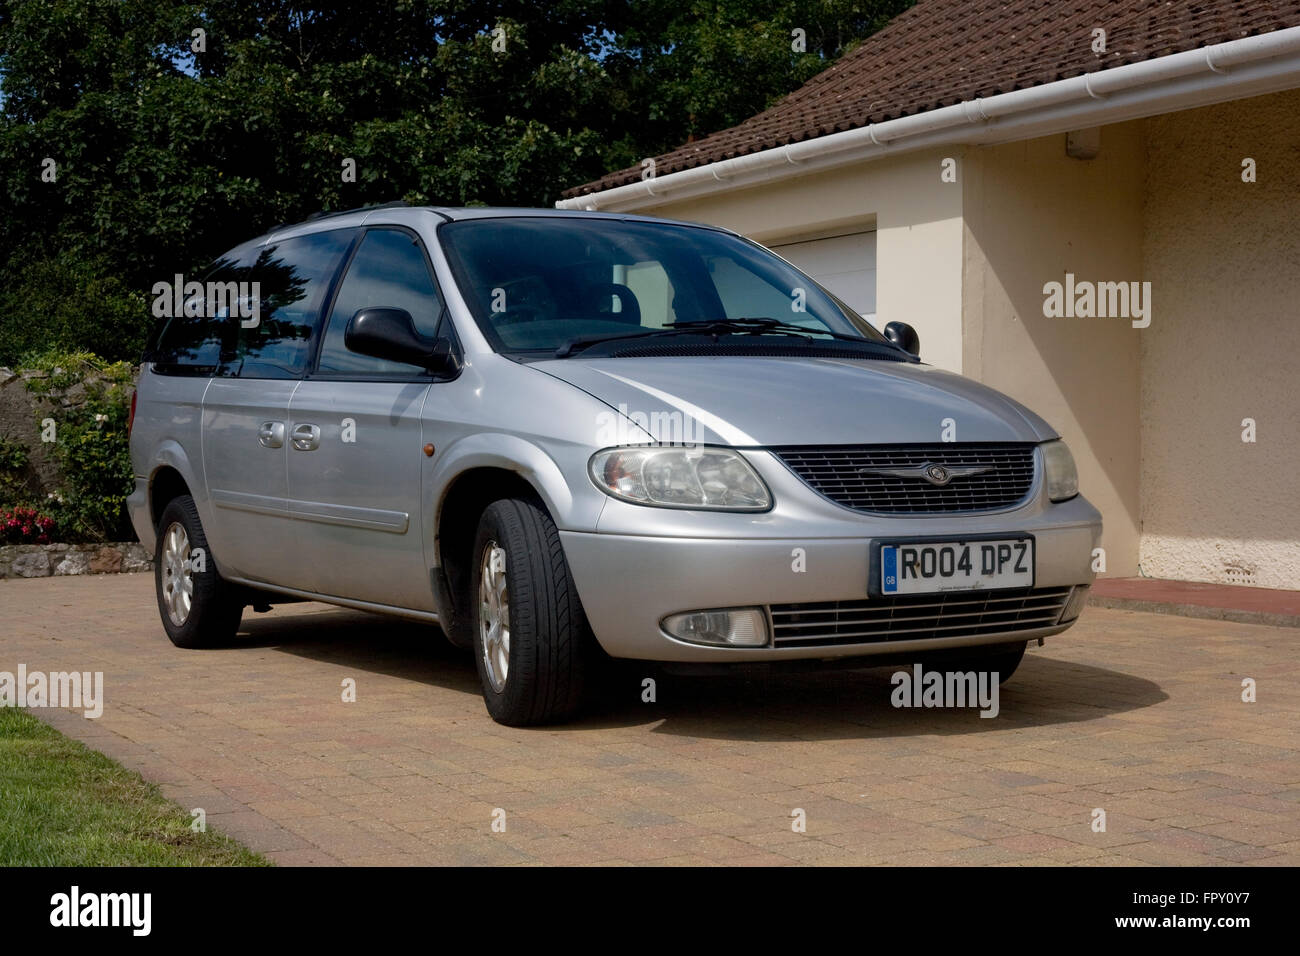 Chrysler grand voyager mpv people carrier parked at owner's home on drive near garage Stock Photo